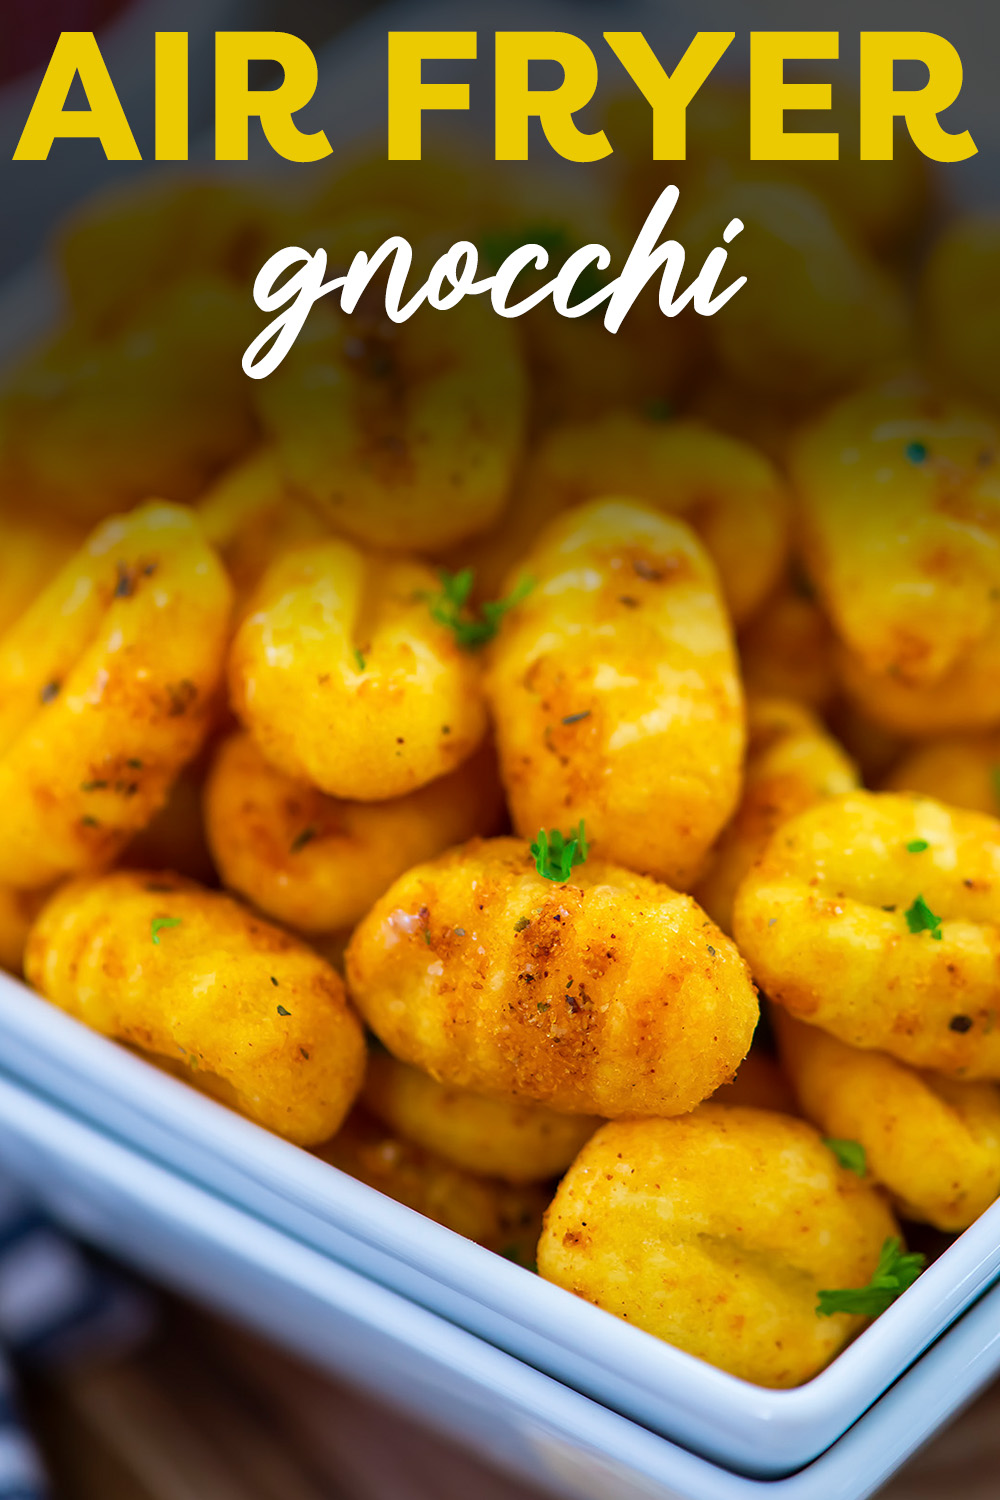 Air fryer gnocchi has a crisp skin and a wonderful fluffy center.  Add some alfredo dip for amazing taste and texture combined!